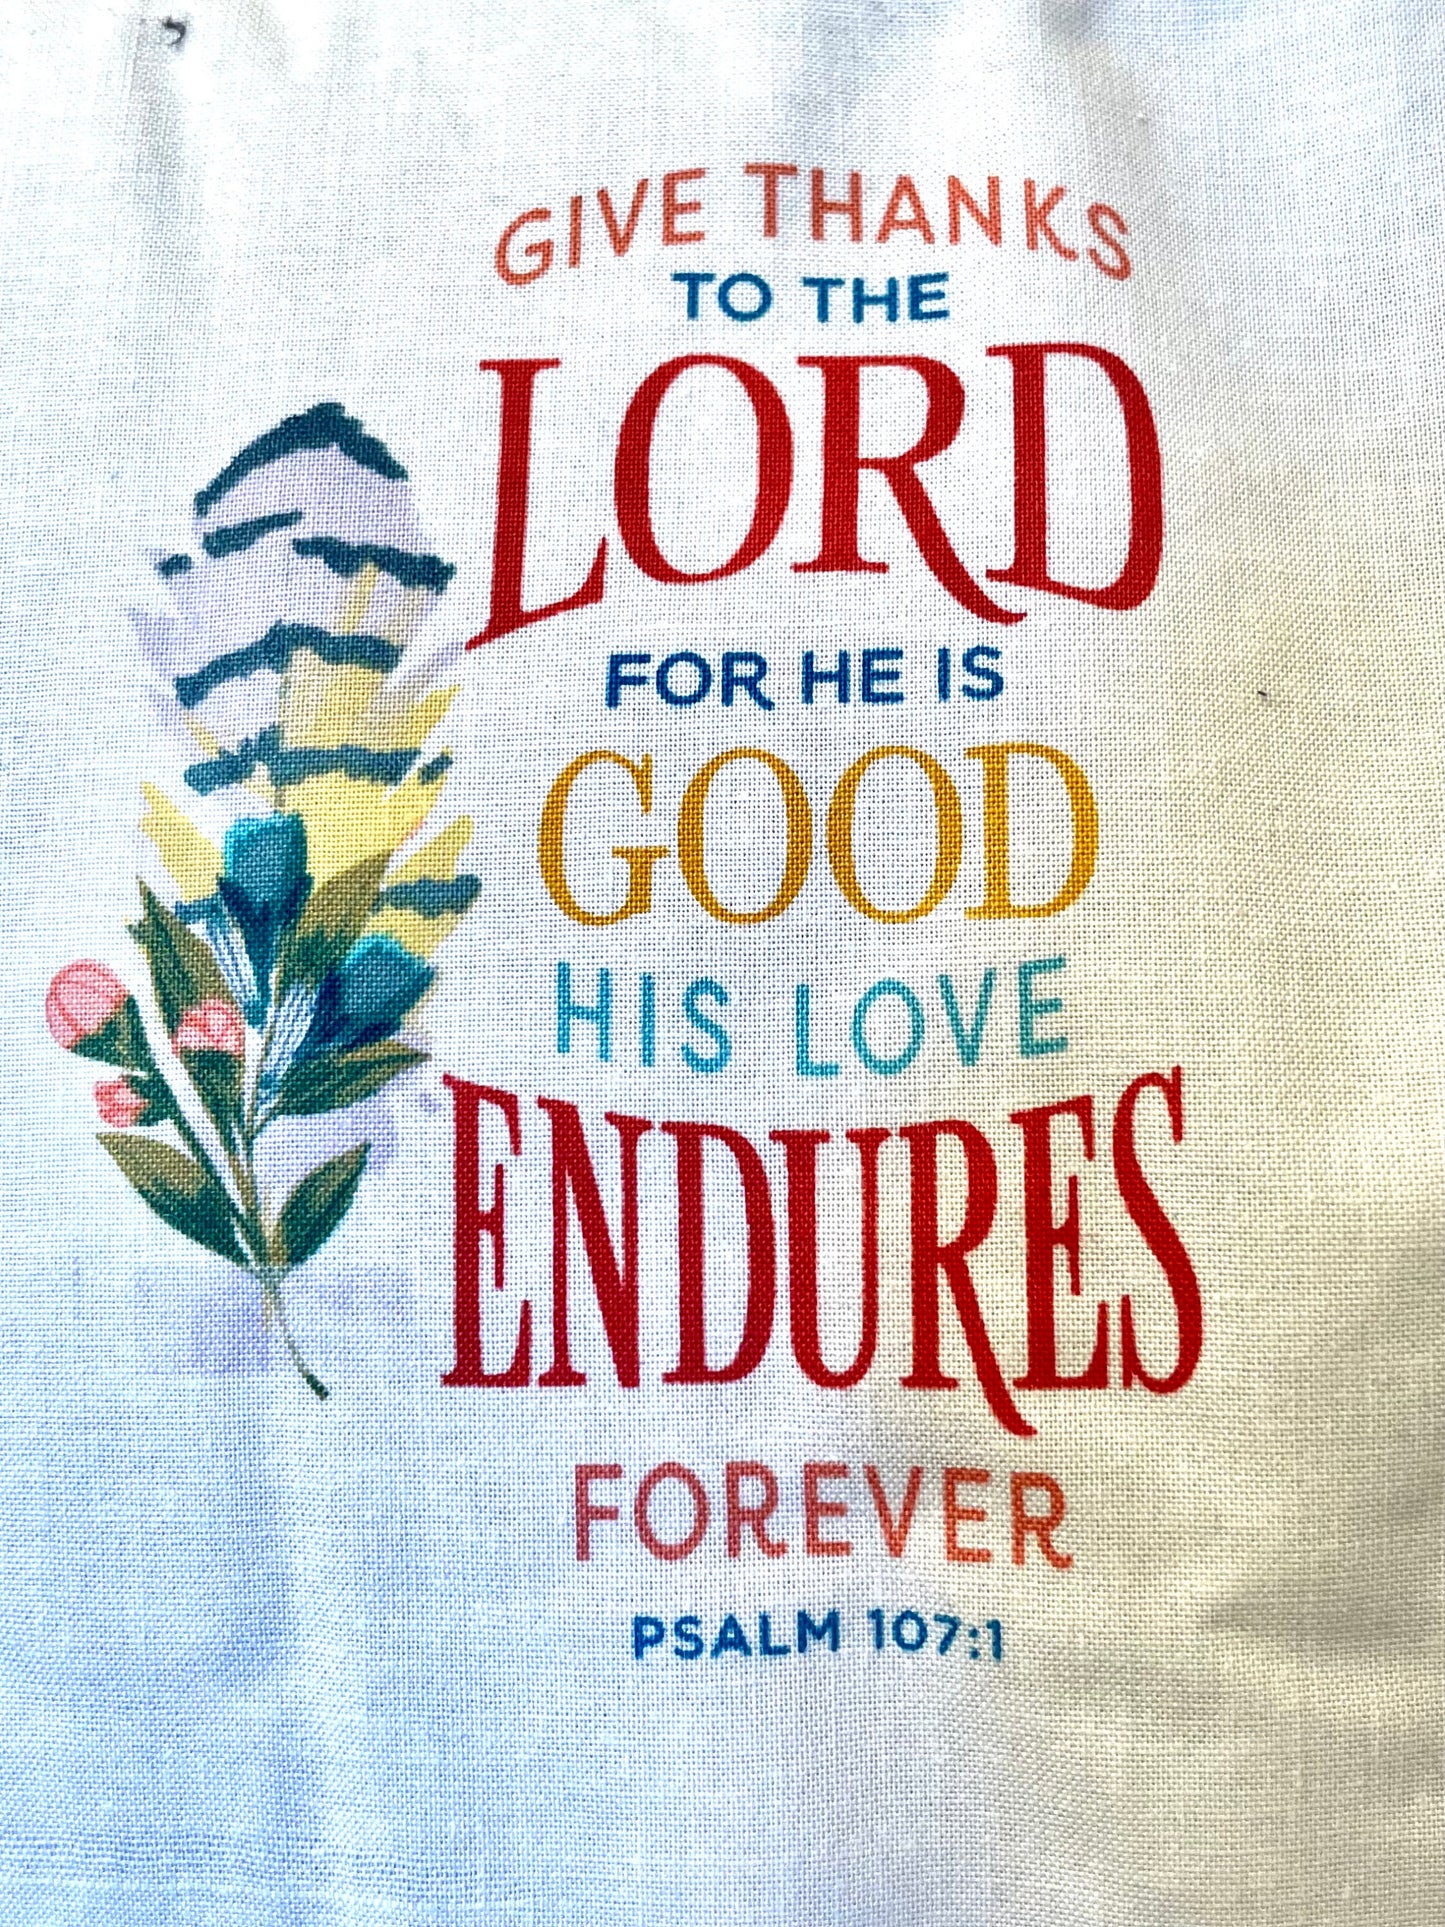 Beautiful, Christian Scriptures and Flowers blanket